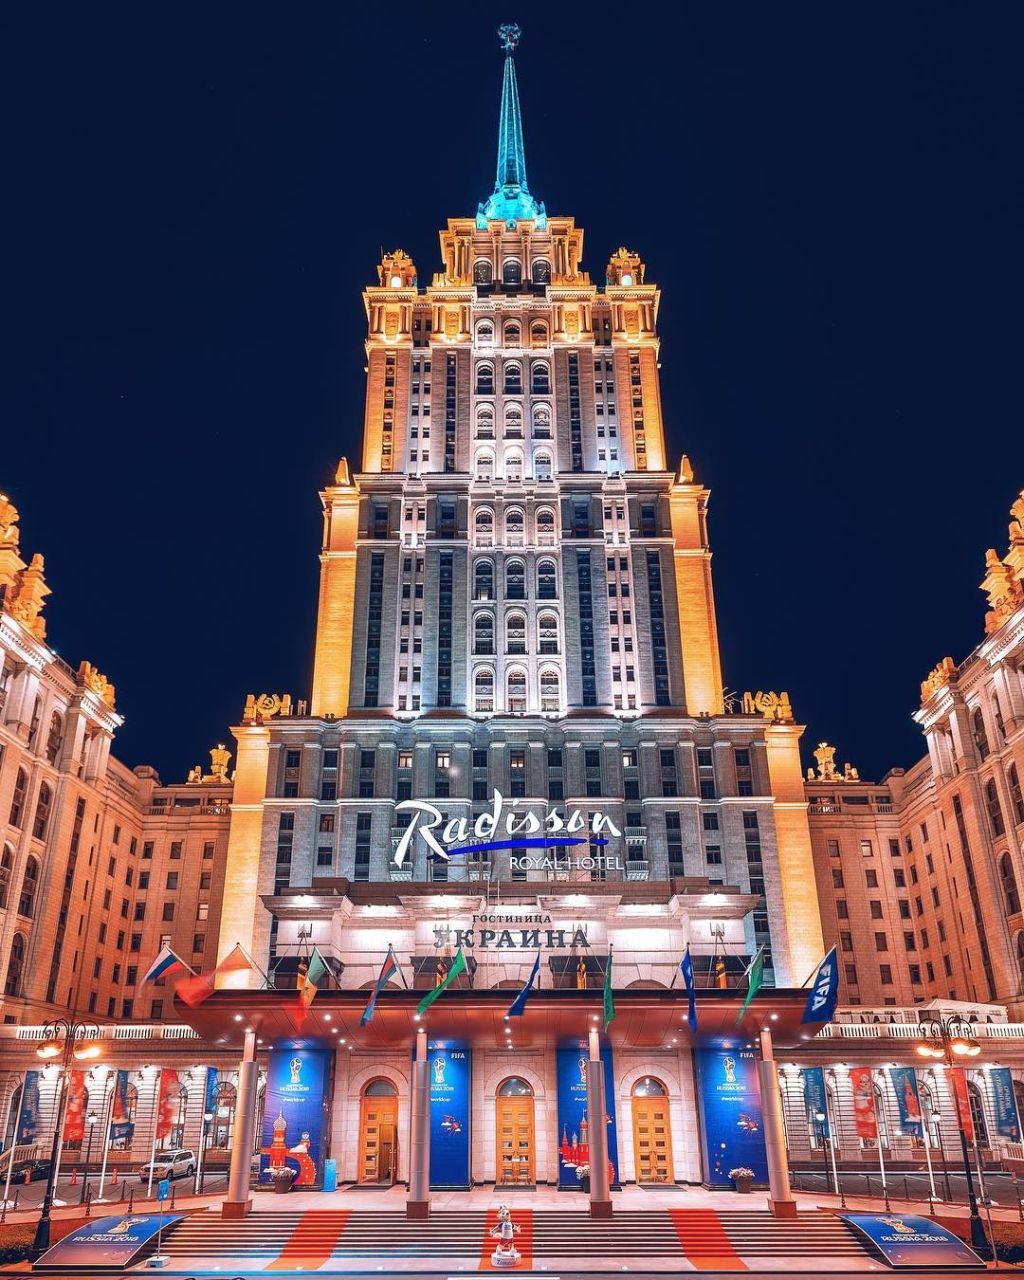 "Hotel Ukraina: A Storied Soviet Icon in the Heart of Moscow"